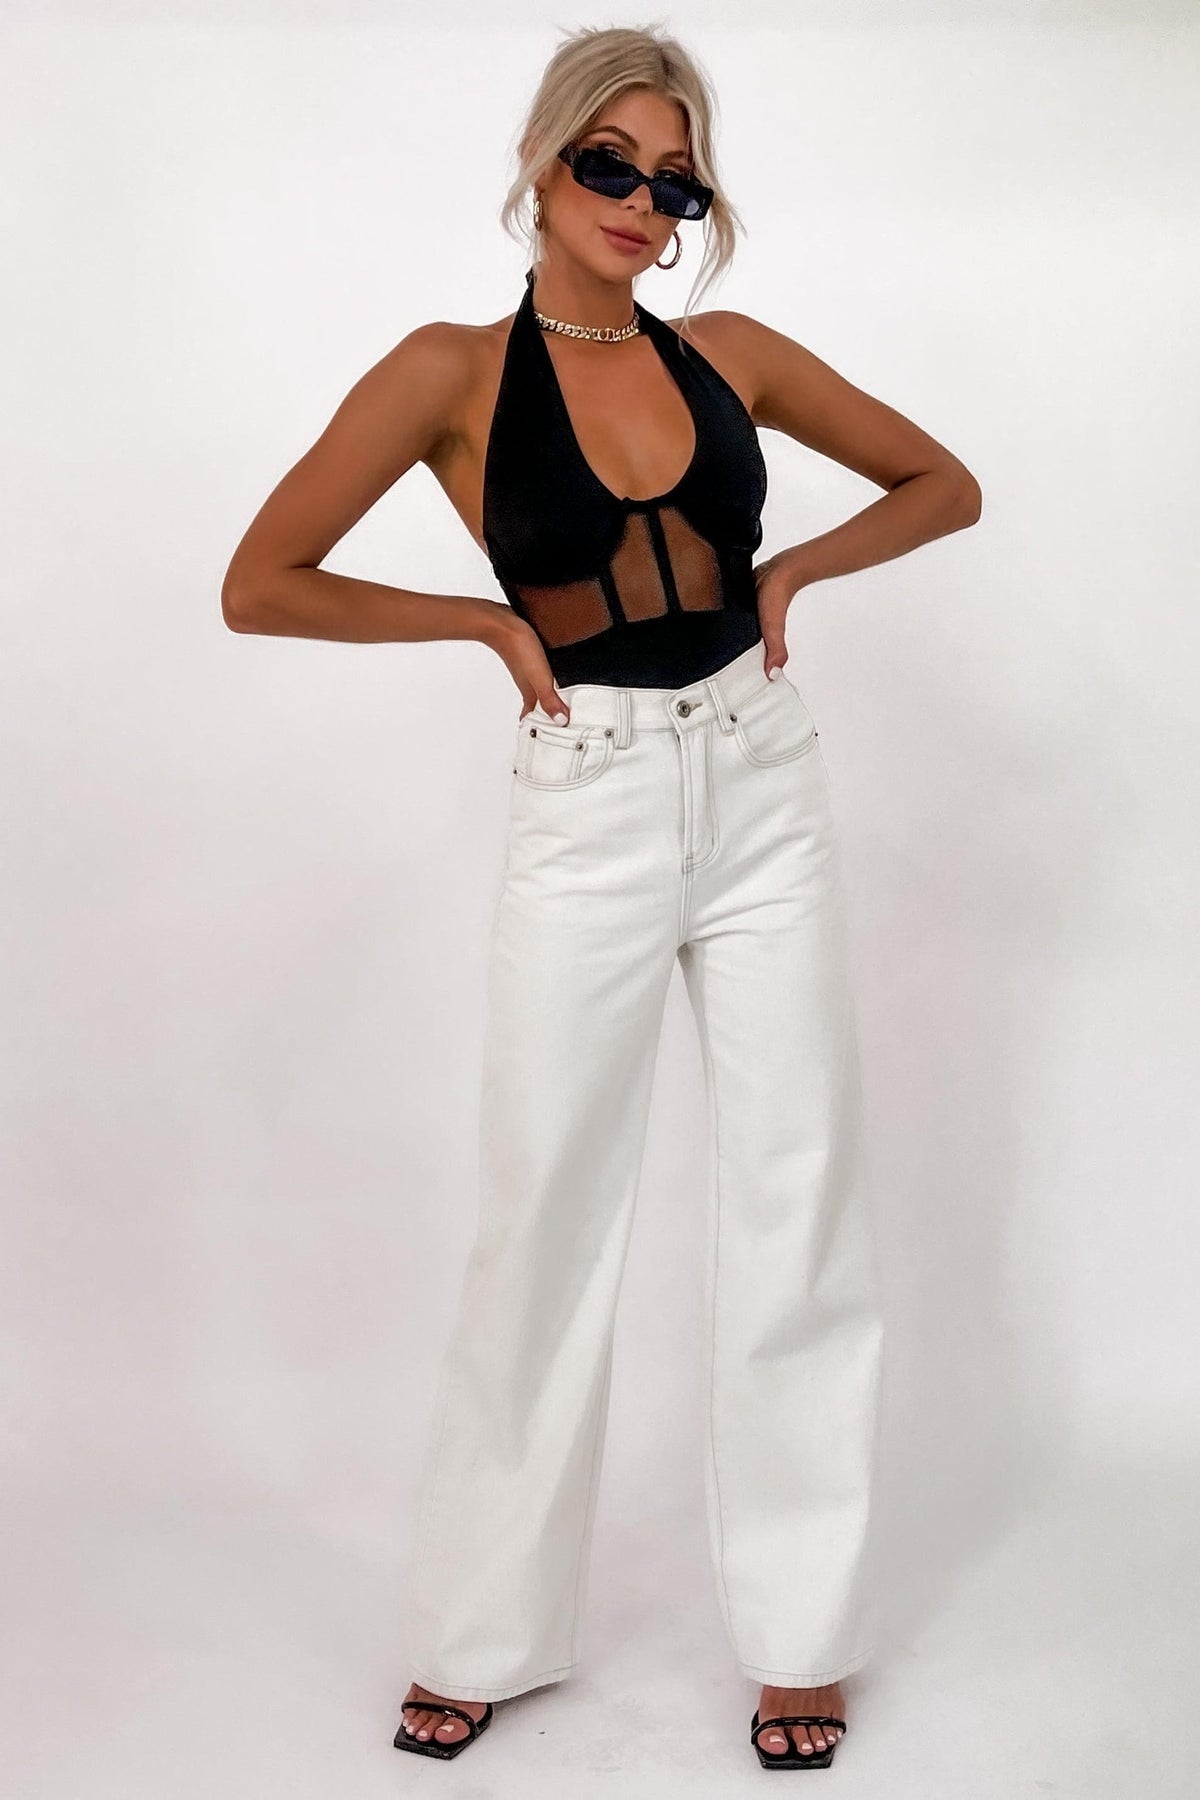 Serenti Bodysuit, BLACK, BODYSUIT, BODYSUITS, POLYESTER &amp; SPANDEX, POLYESTER AND SPANDEX, Sale, SPANDEX &amp; POLYESTER, SPANDEX AND POLYESTER, TOP, TOPS, Our New Serenti Bodysuit Is Now Only $53.00 Exclusive At Mishkah, Our New Serenti Bodysuit is now only $53.00-We Have The Latest Women&#39;s Tops @ Mishkah Online Fashion Boutique-MISHKAH